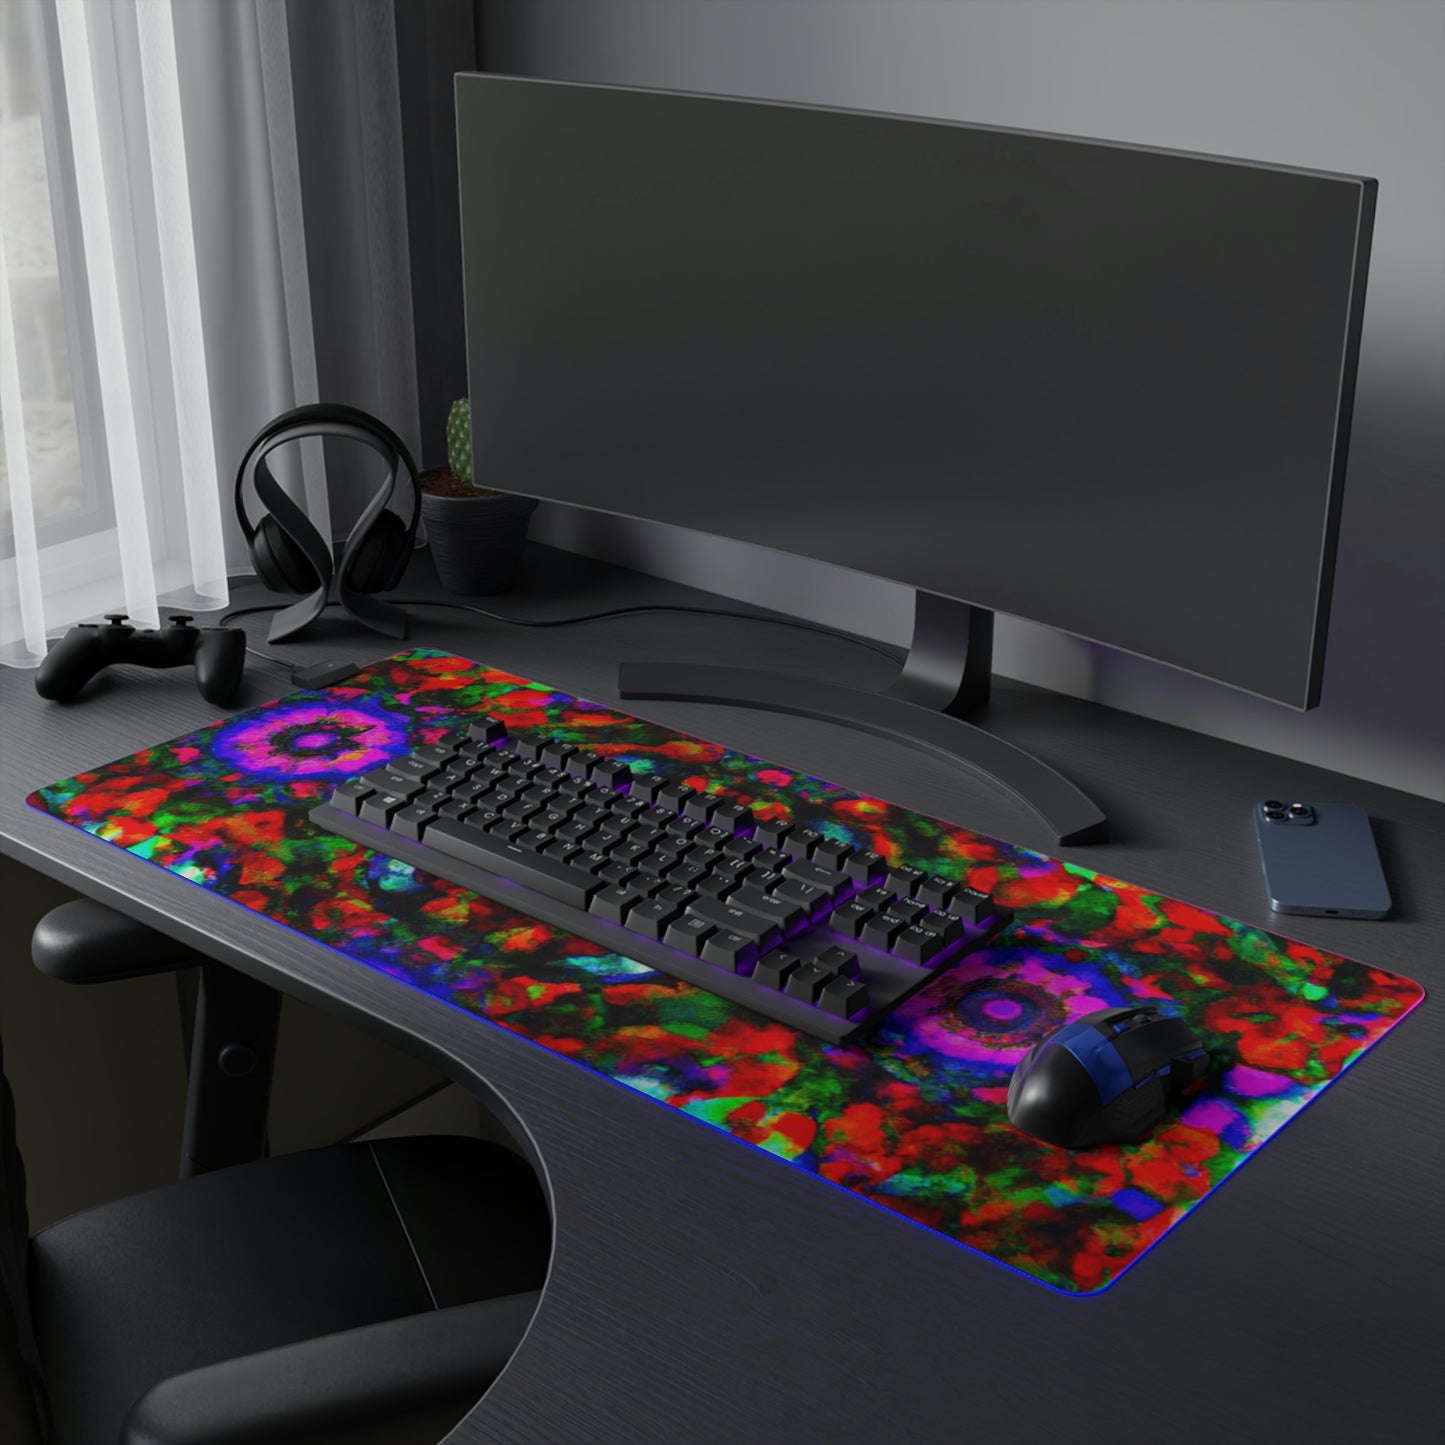 Alice the Ace-Ace Rocket Rider - Psychedelic Trippy LED Light Up Gaming Mouse Pad